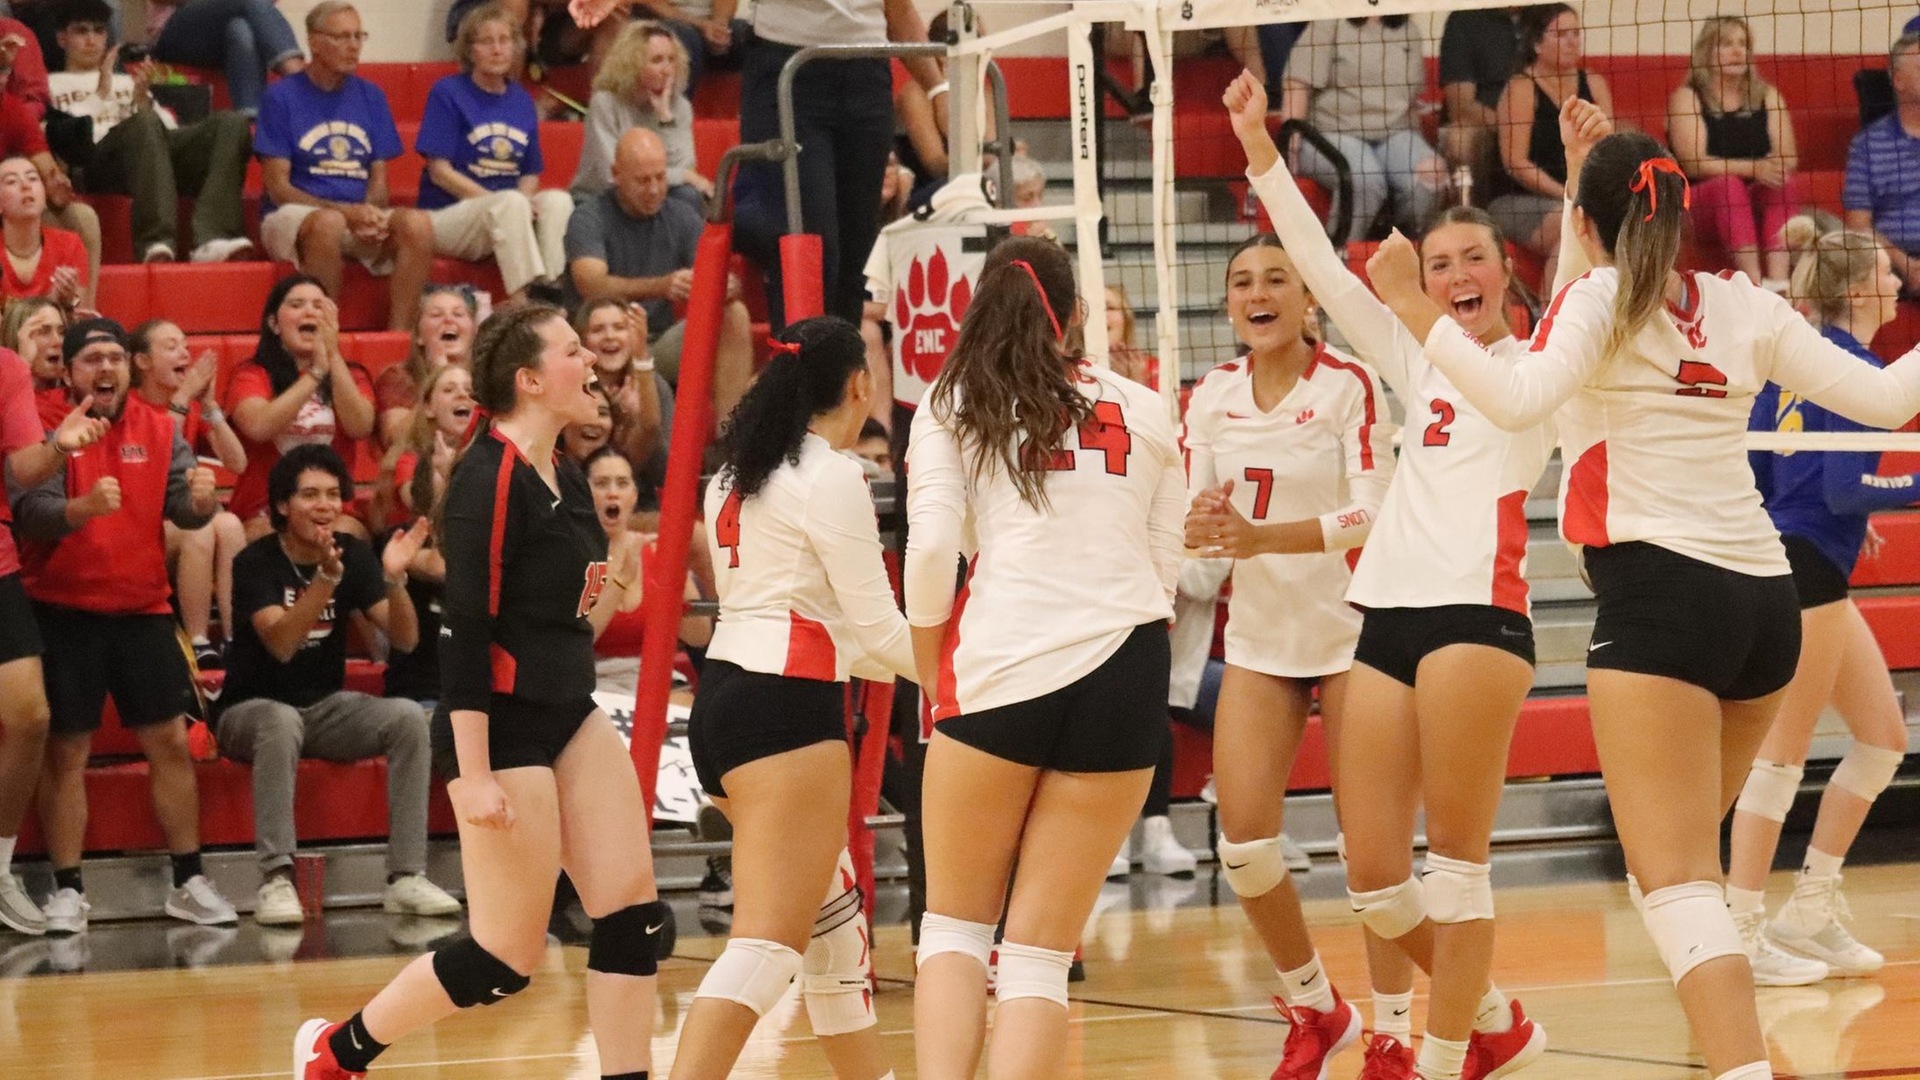 CHAMPIONSHIP PREVIEW: Women’s Volleyball Meets Maine Maritime in NAC Finals Saturday